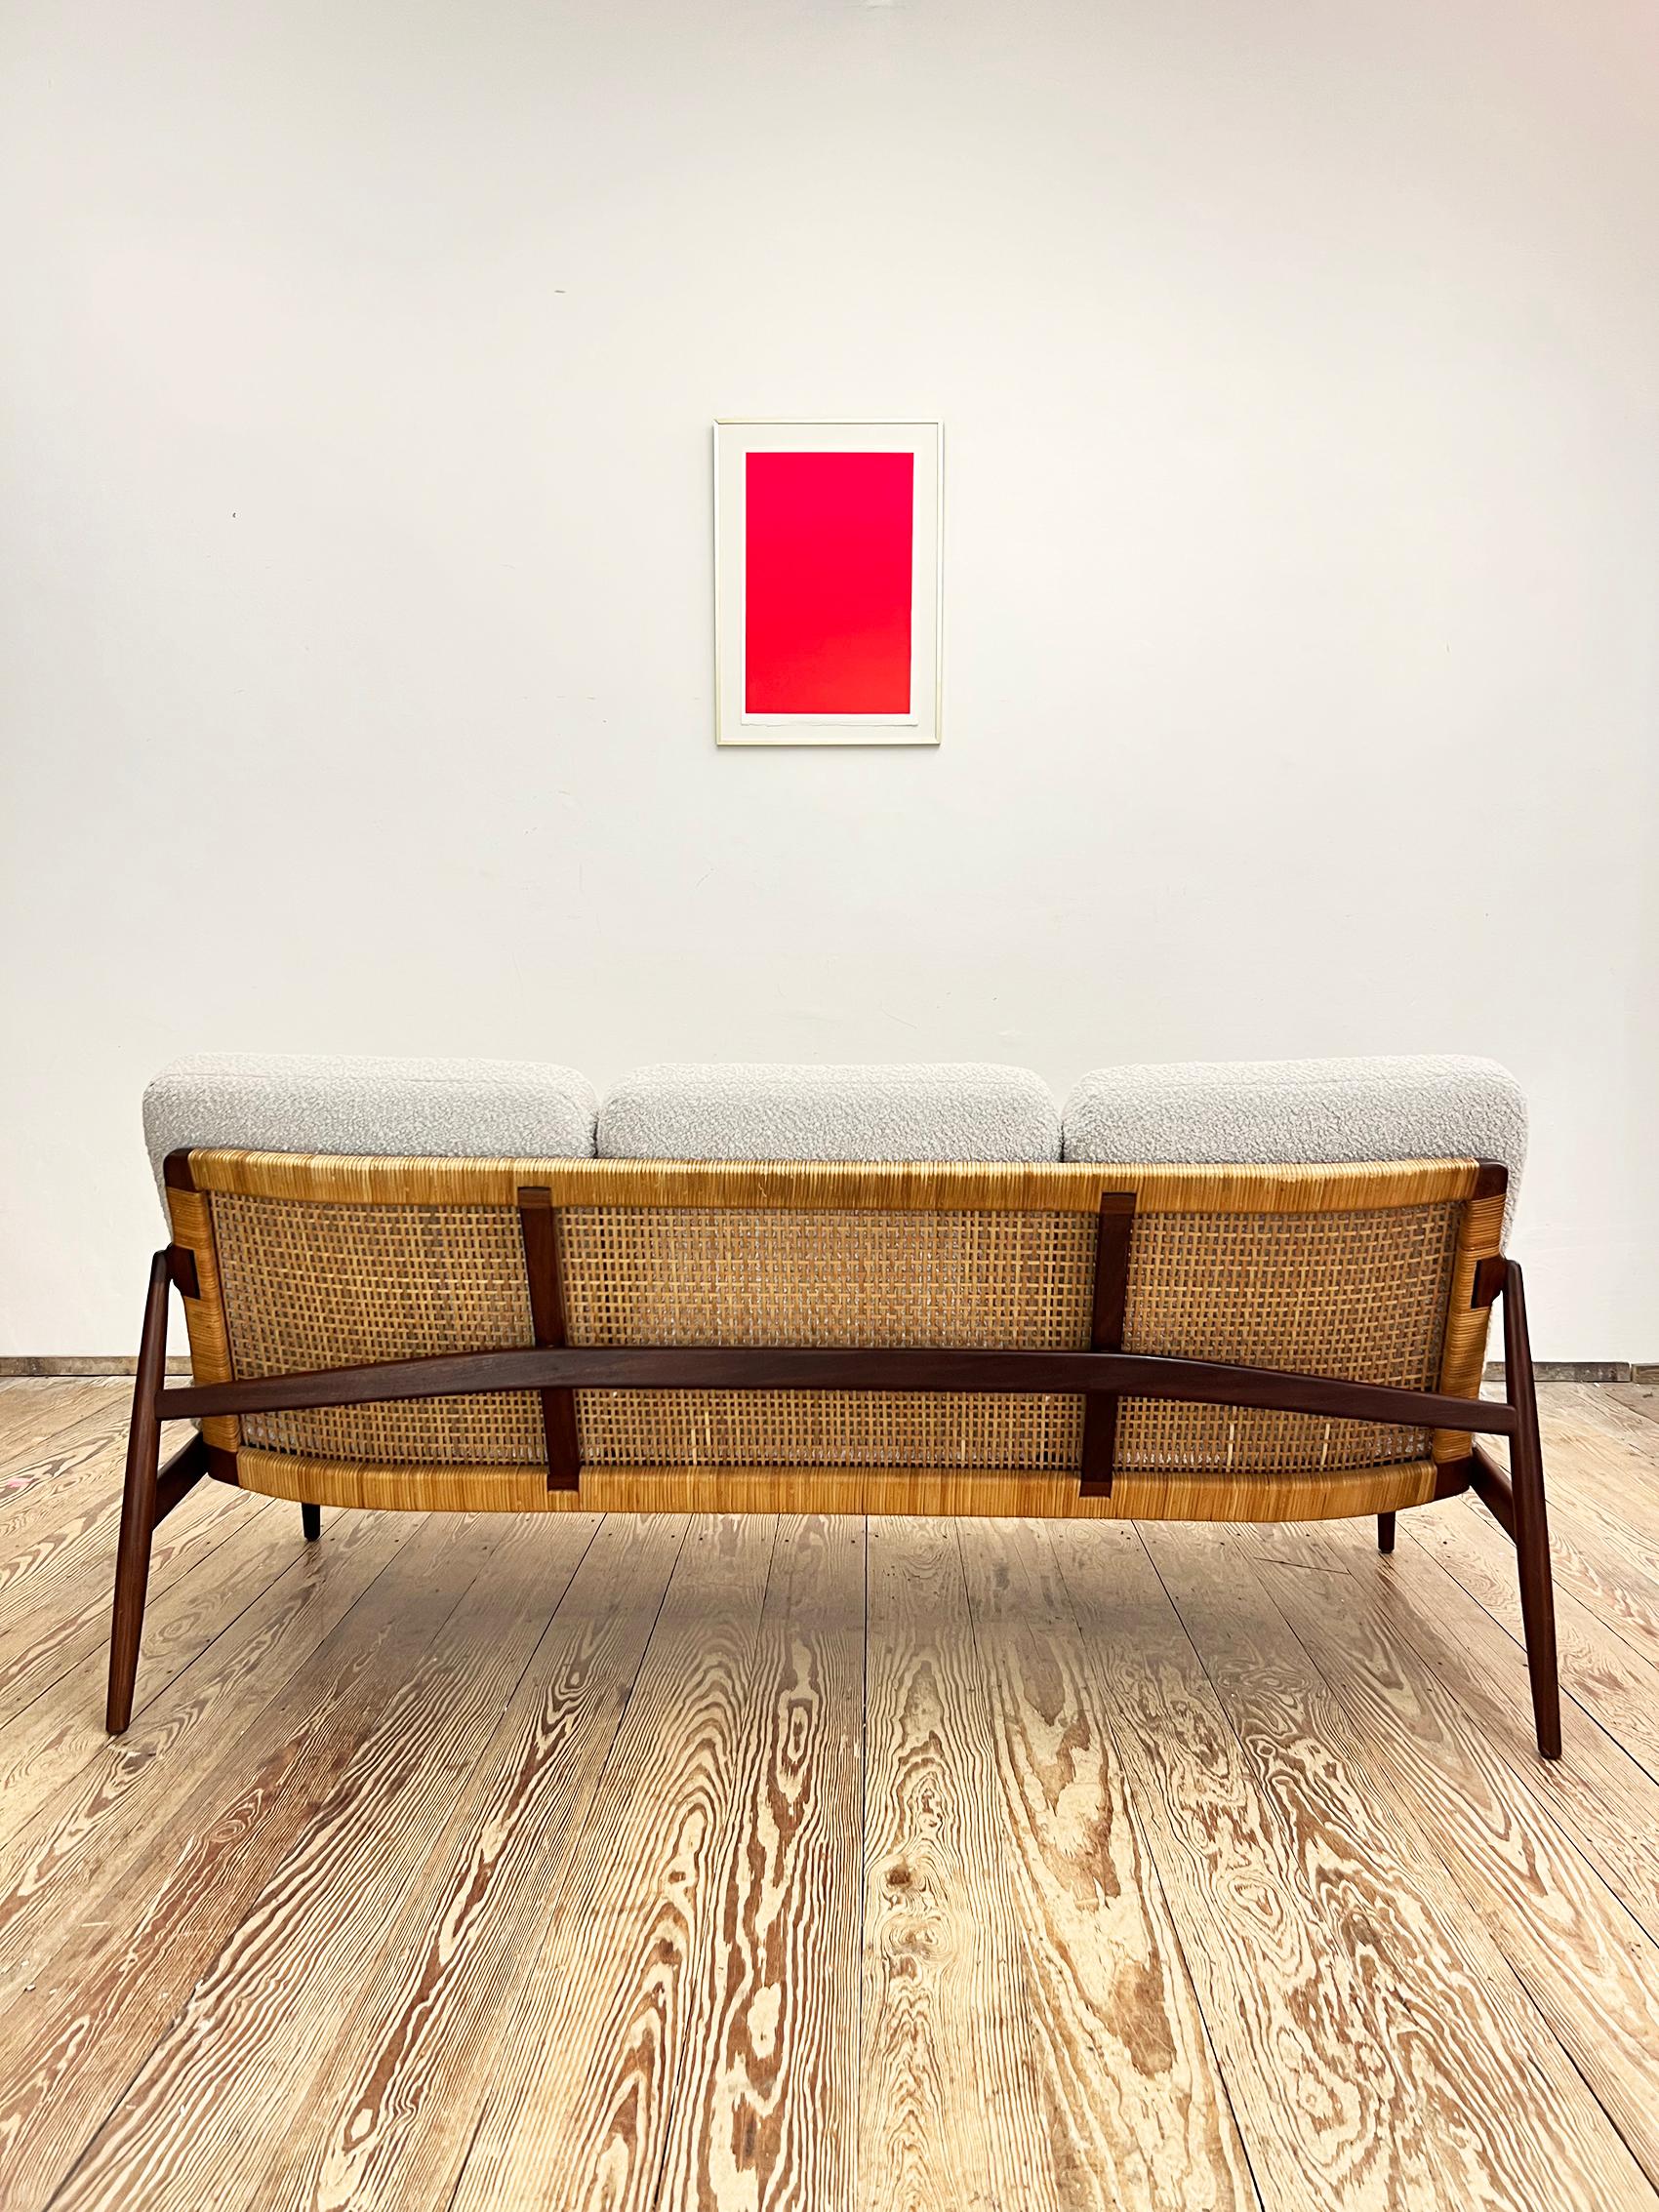 Mid-20th Century Mid-Century Teak Sofa or Couch by Hartmut Lohmeyer, German Design, 1950s For Sale